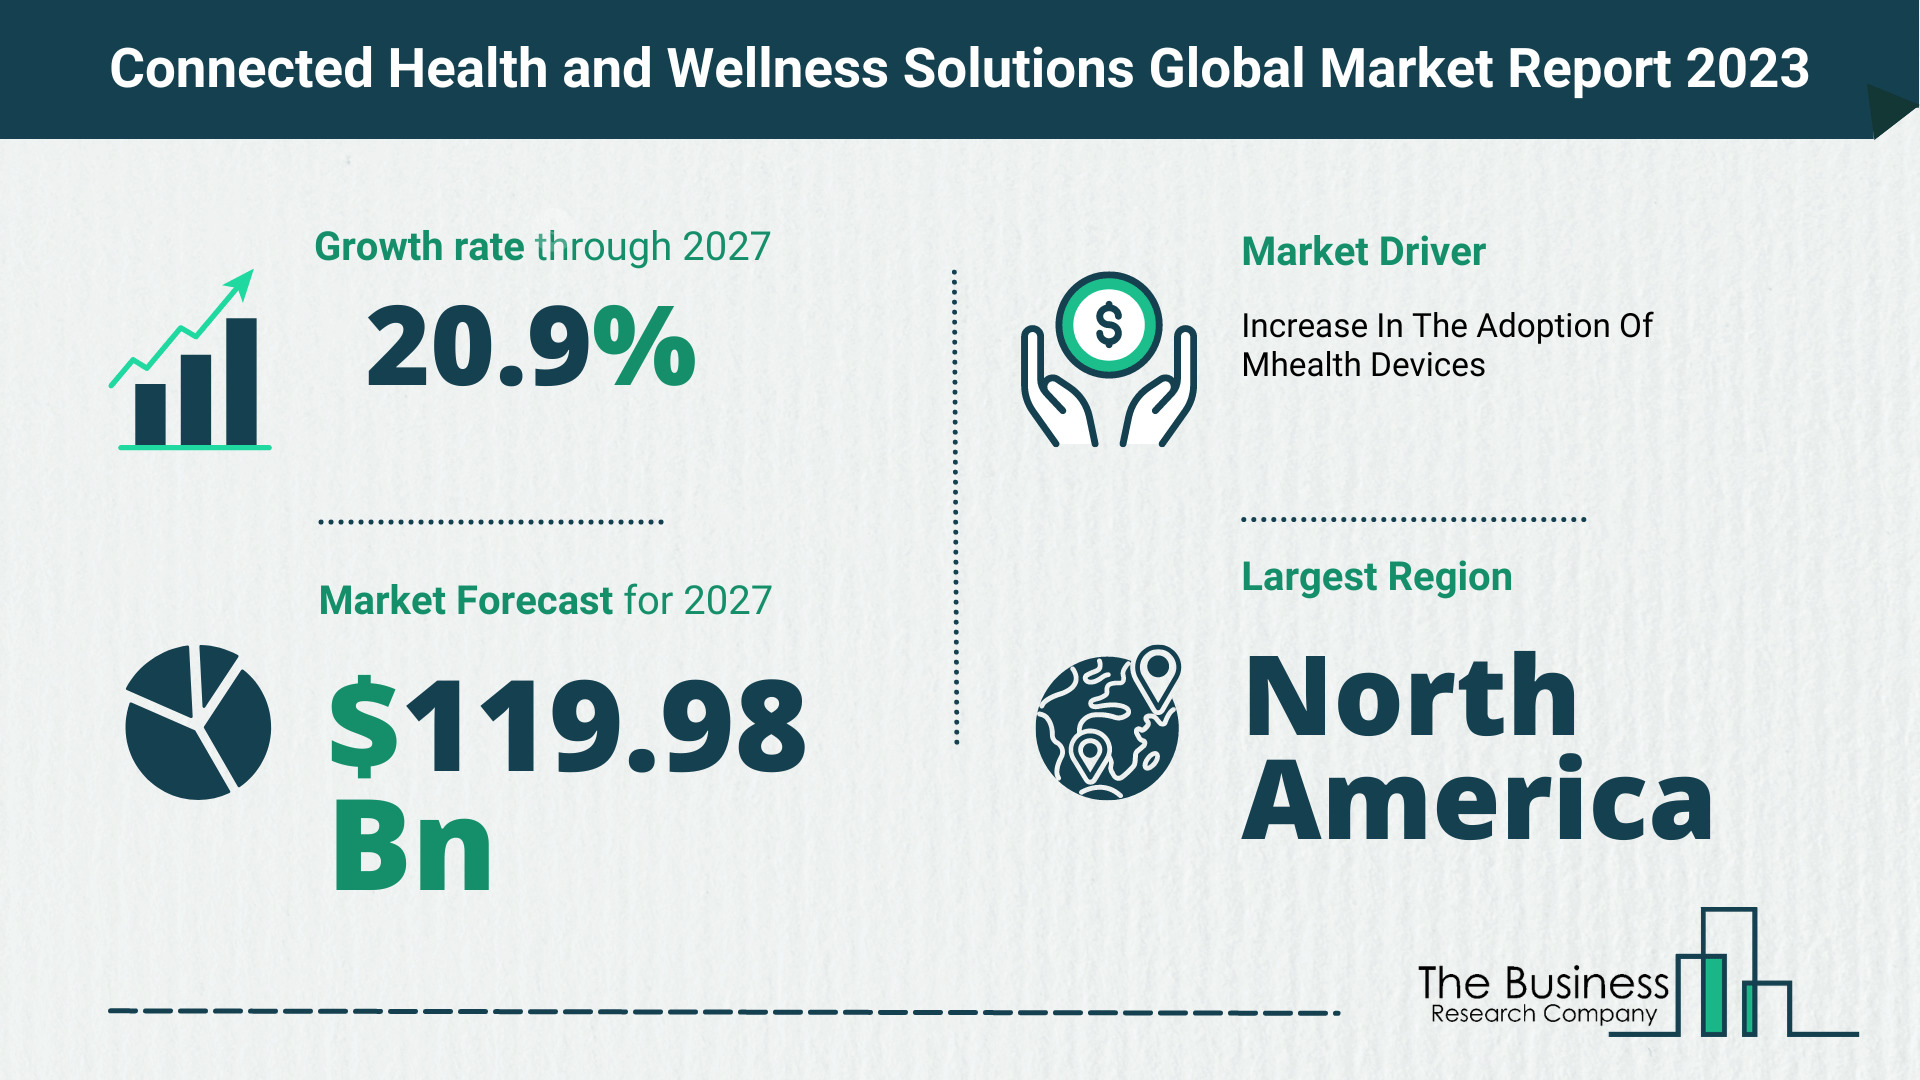 connected health and wellness solutions market